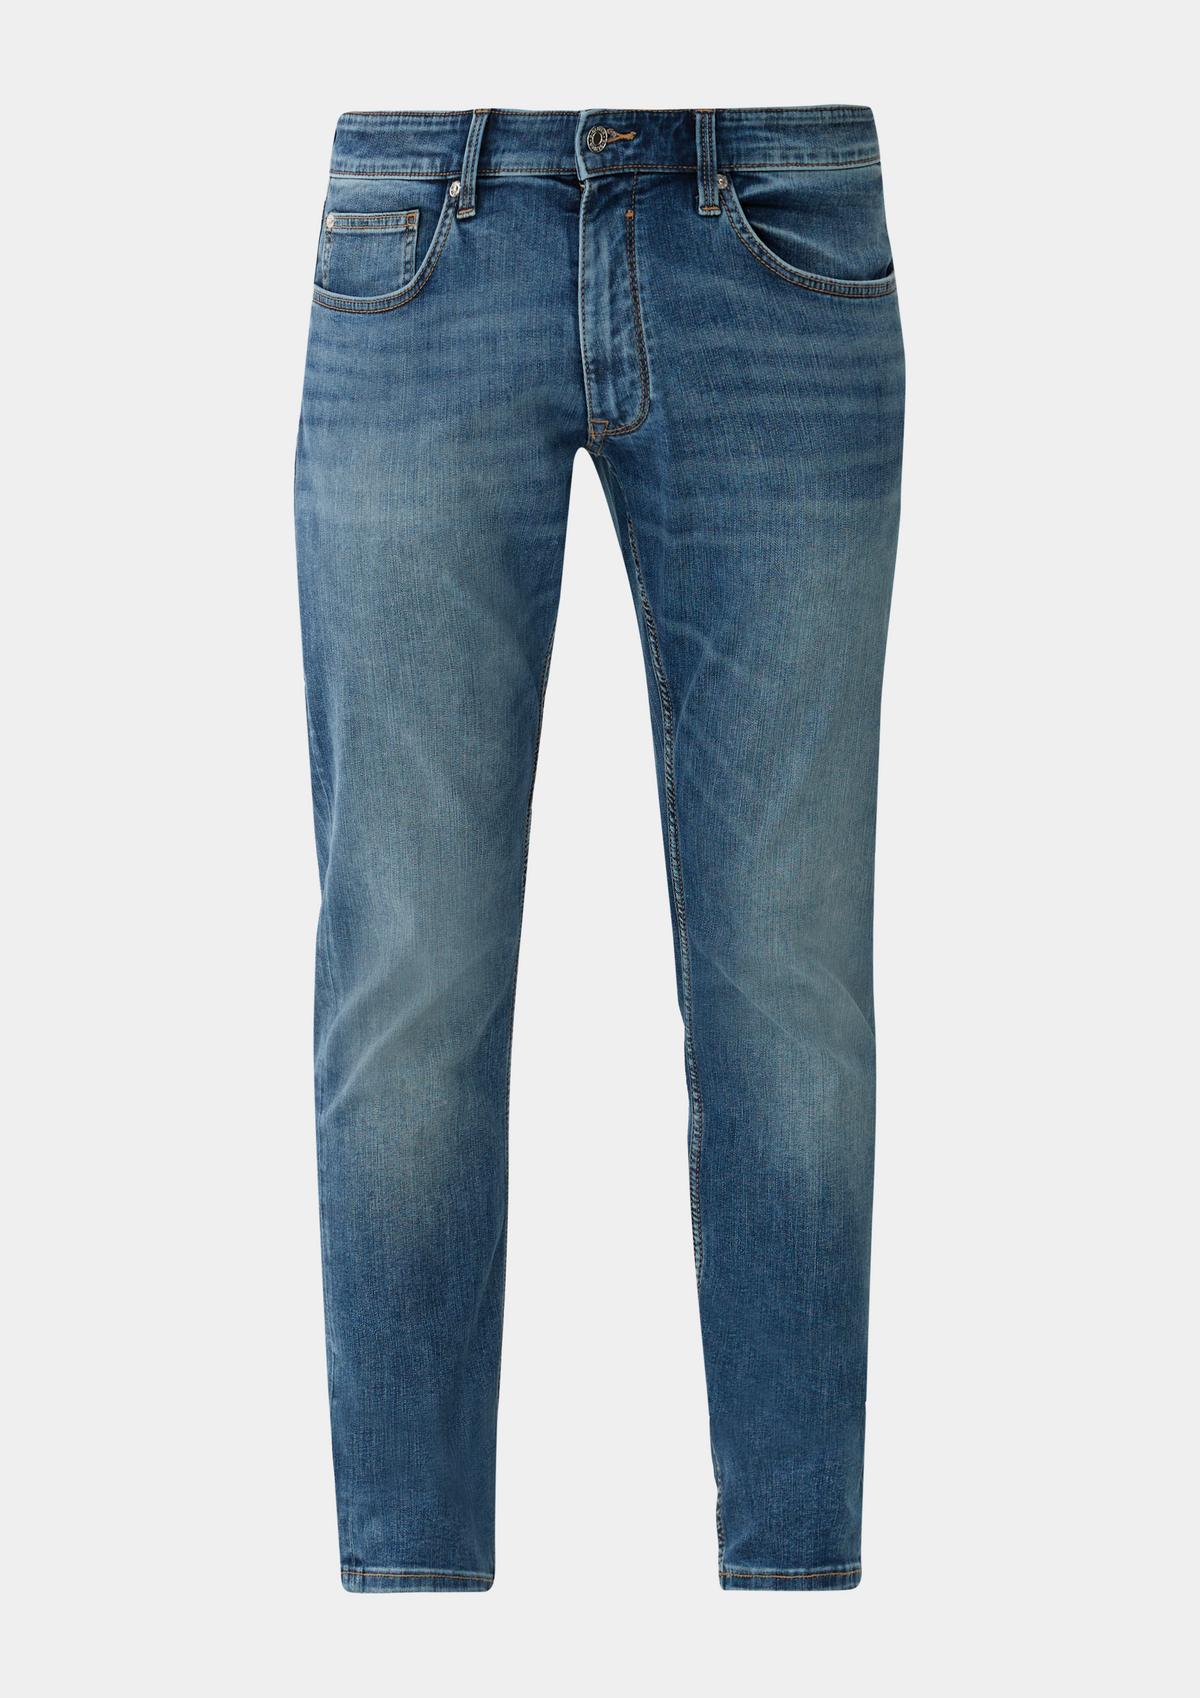 s.Oliver Jeans Keith / Slim Fit / Mid Rise / Slim: Leg